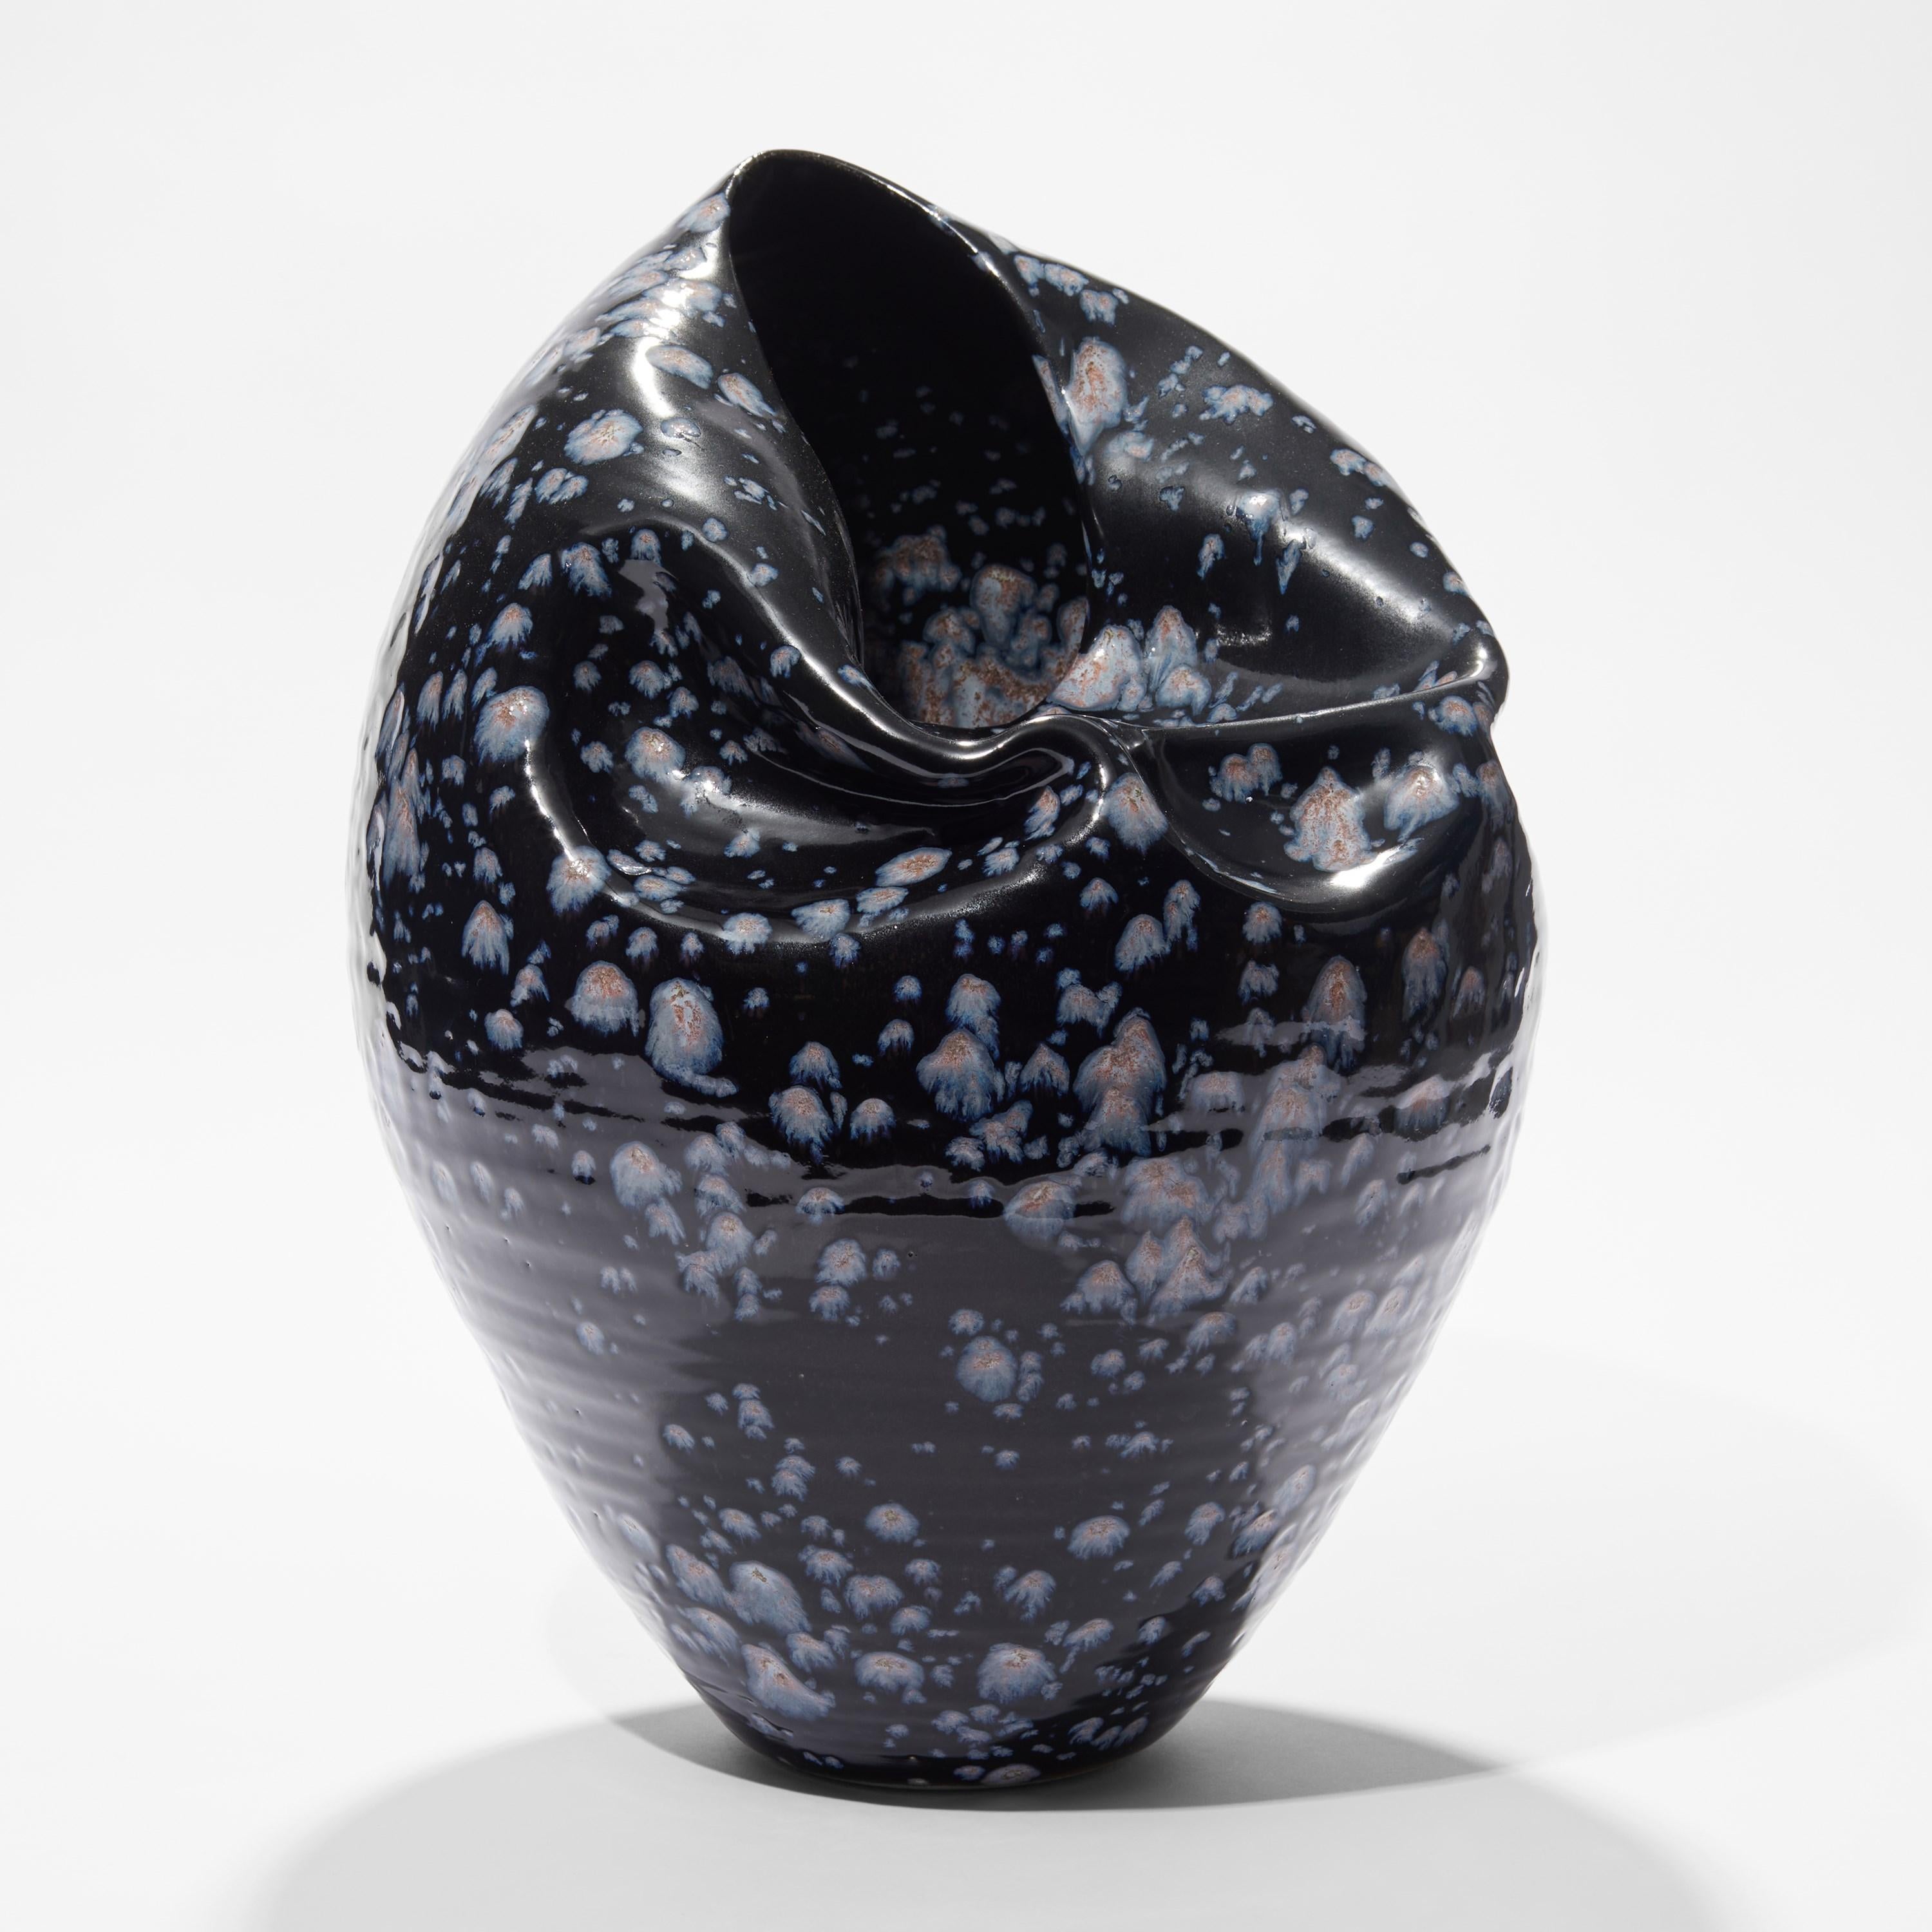 ‘Tall Collapsed Form in Galactic Blue No 92’ is a unique sculptural vessel by the British artist, Nicholas Arroyave-Portela.

Nicholas Arroyave-Portela’s professional ceramic practise began in 1994. After 20 years based in London, he moved and set